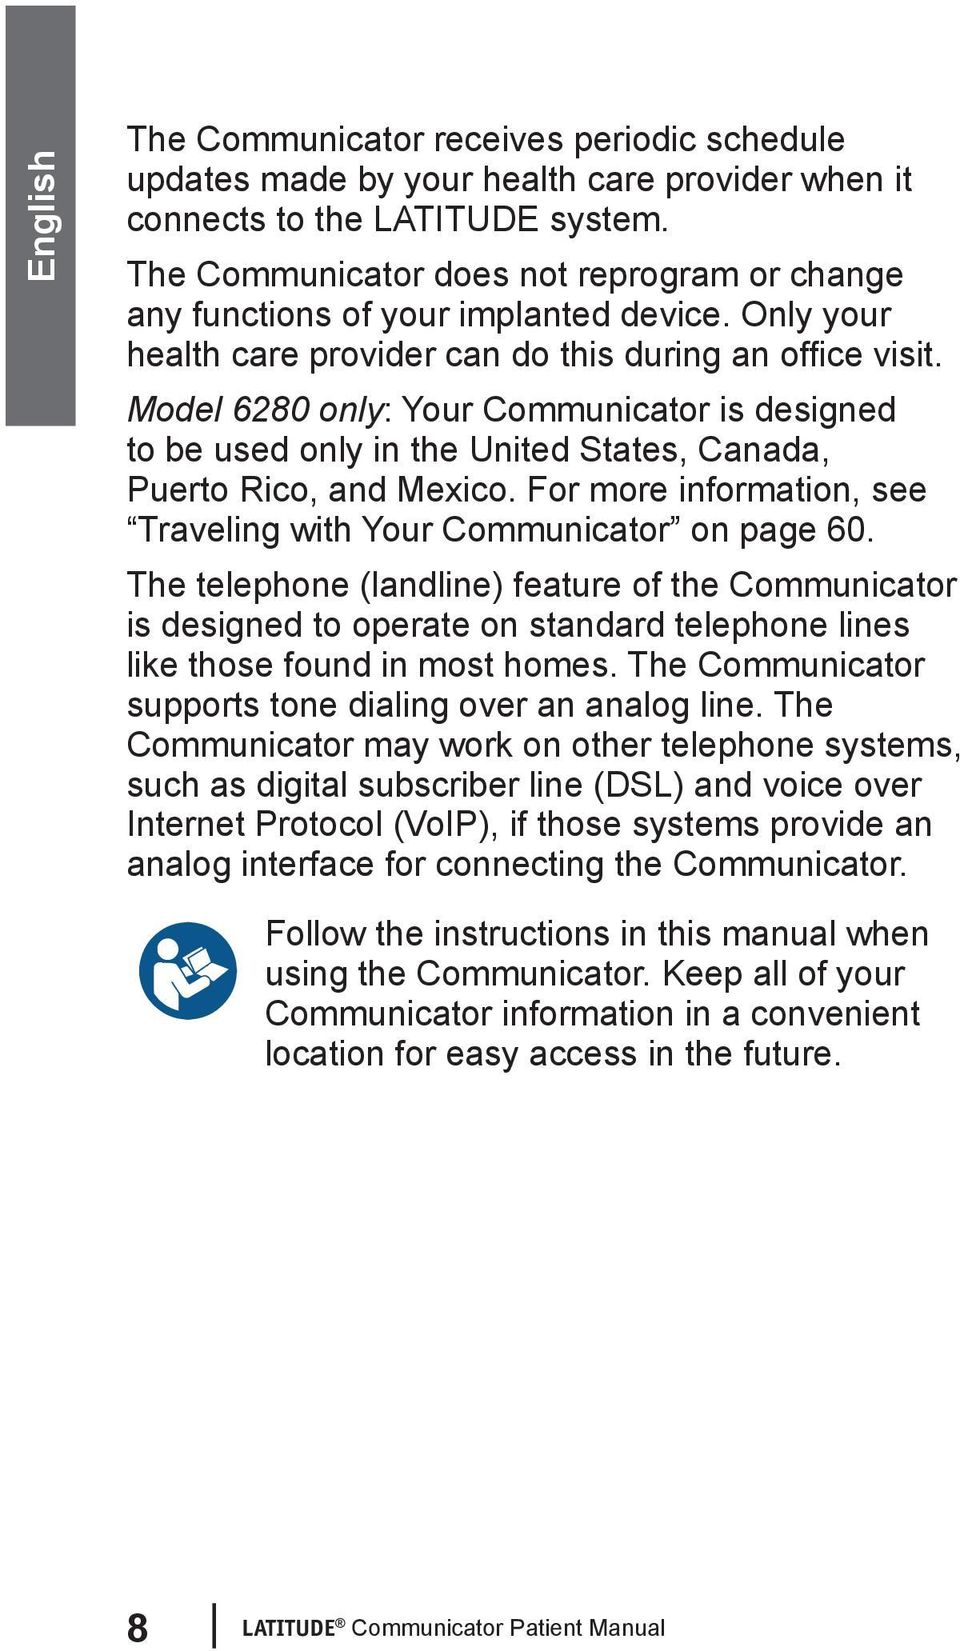 Model 6280 only: Your Communicator is designed to be used only in the United States, Canada, Puerto Rico, and Mexico. For more information, see Traveling with Your Communicator on page 60.